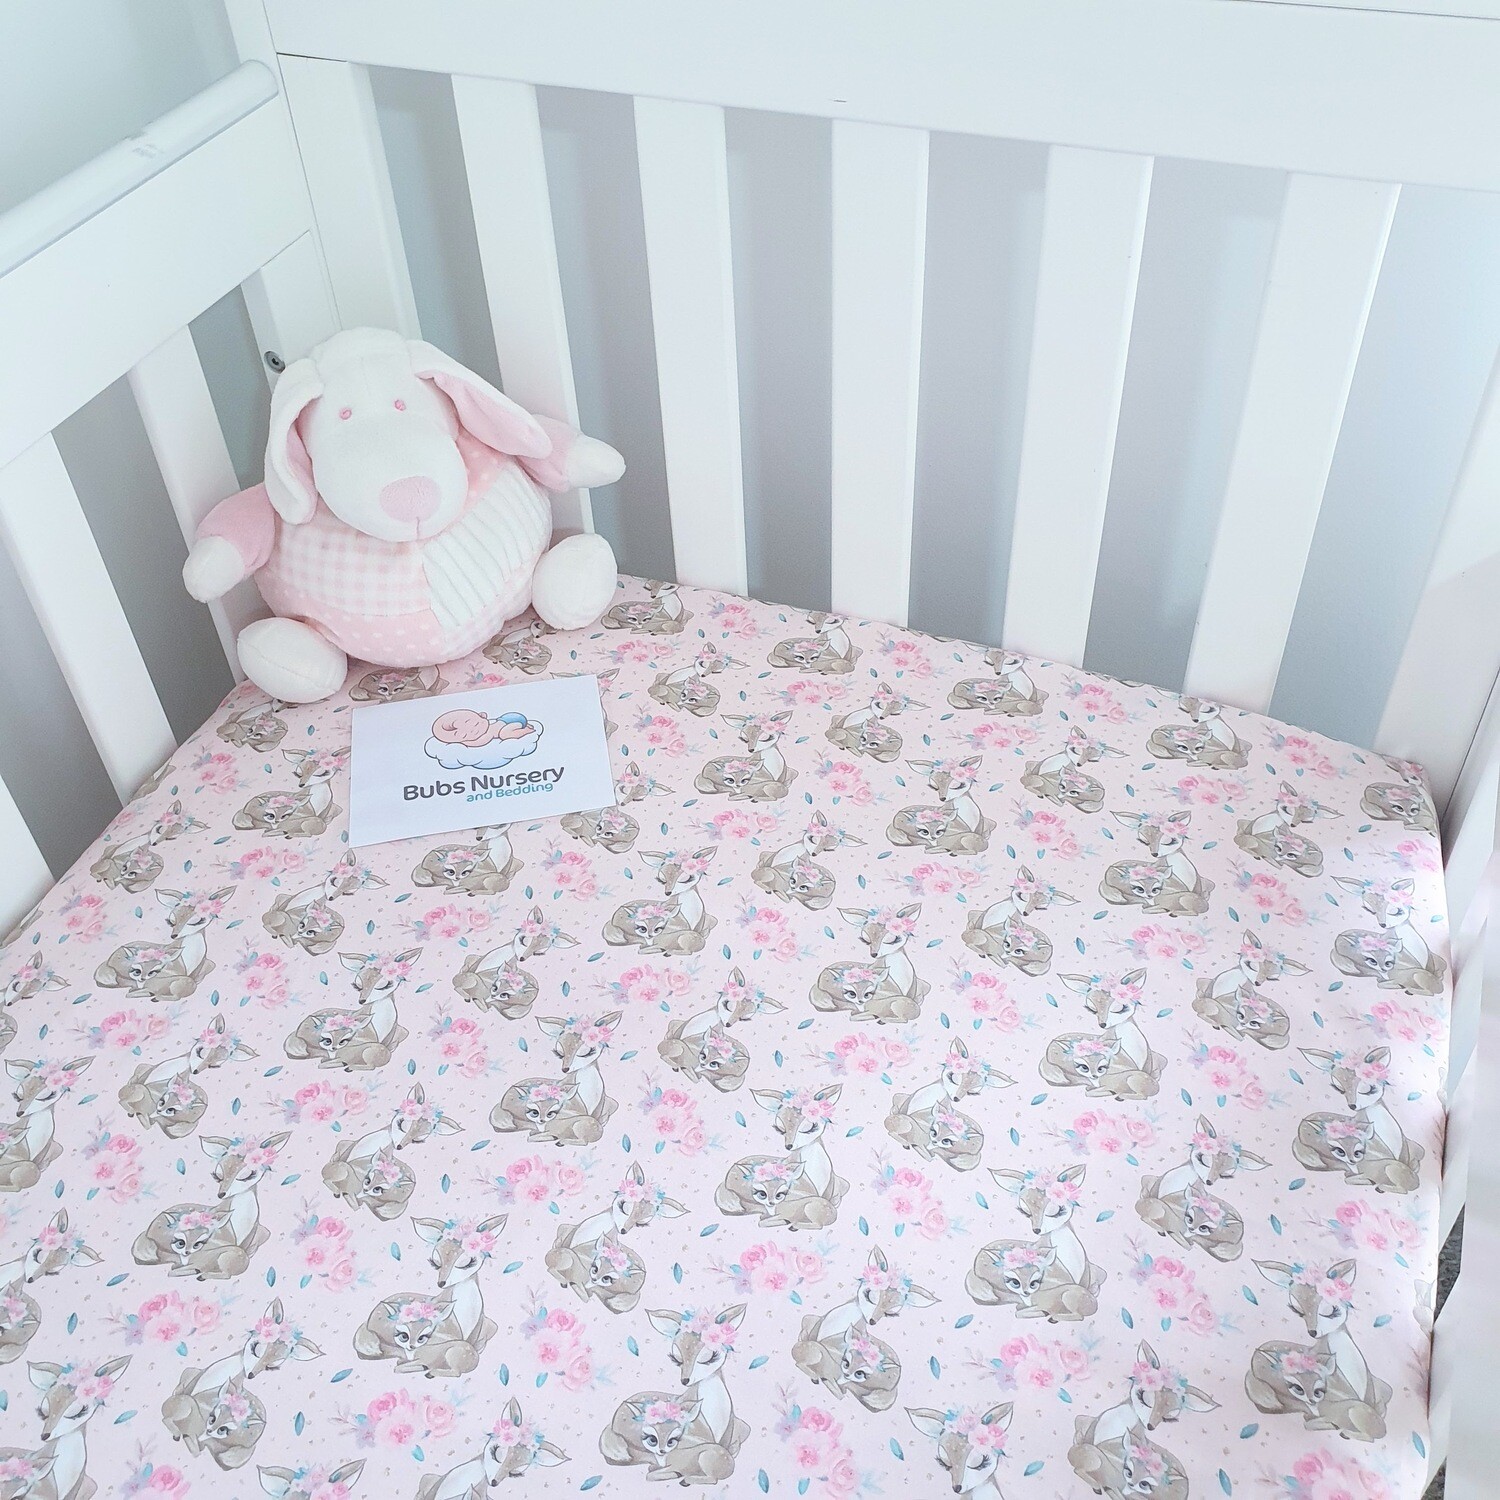 Sweet floral Deer baby pink cotton fitted cot sheet - 69 x 130 cm